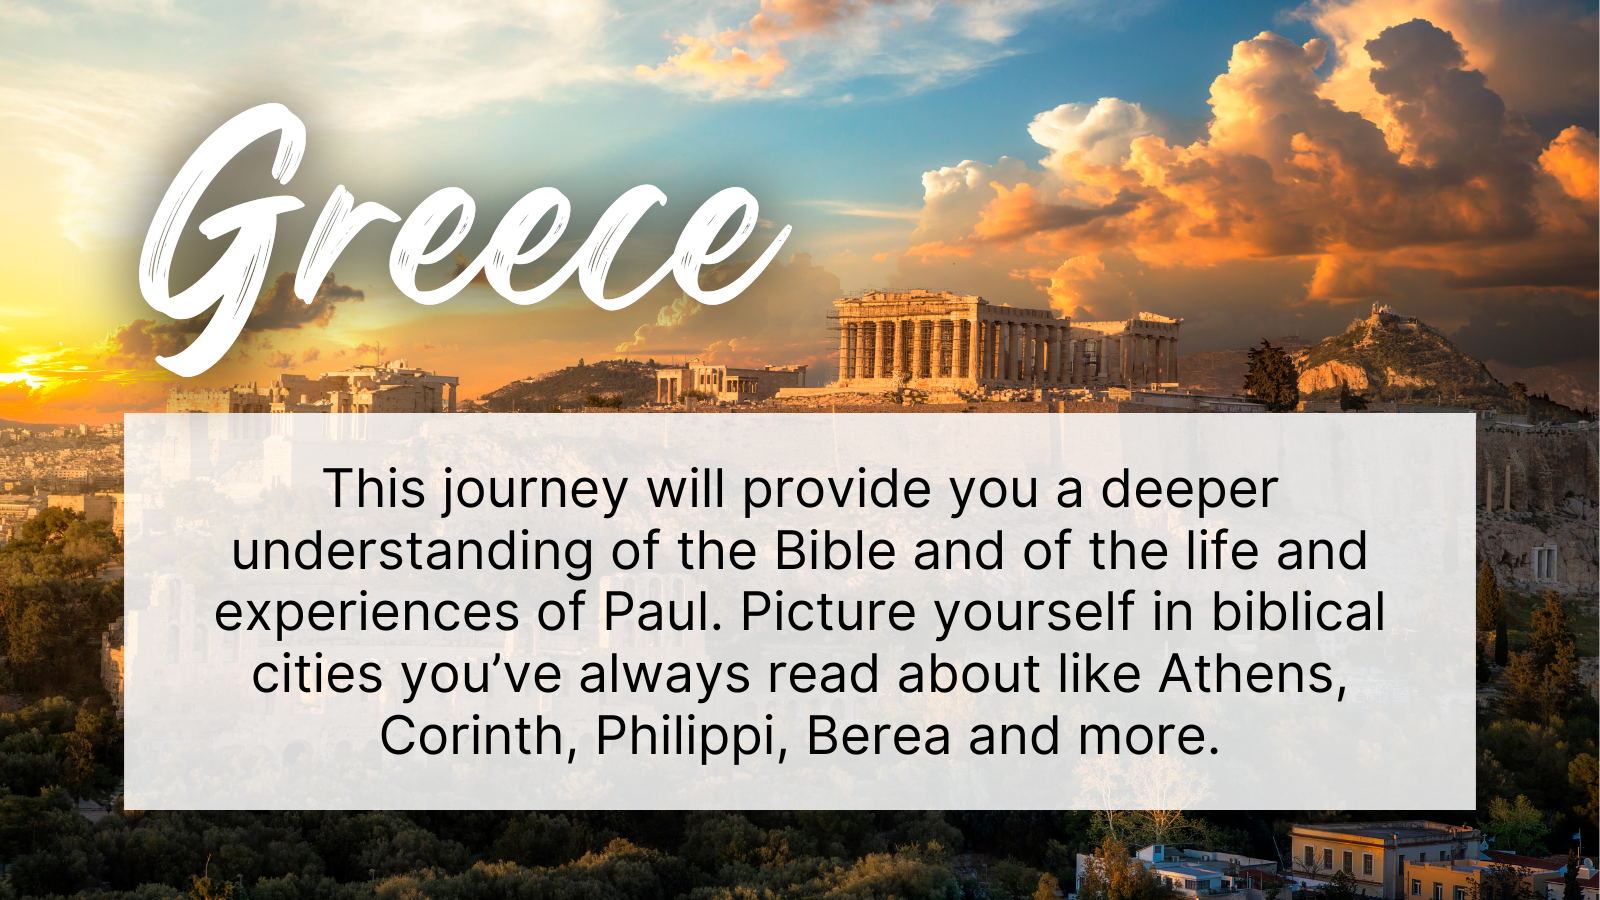 This journey will provide you a deeper understanding of the Bible and of the life and experiences of Paul. Picture yourself in biblical cities you've always read about like Athens, Corinth, Philippi, Berea and more.